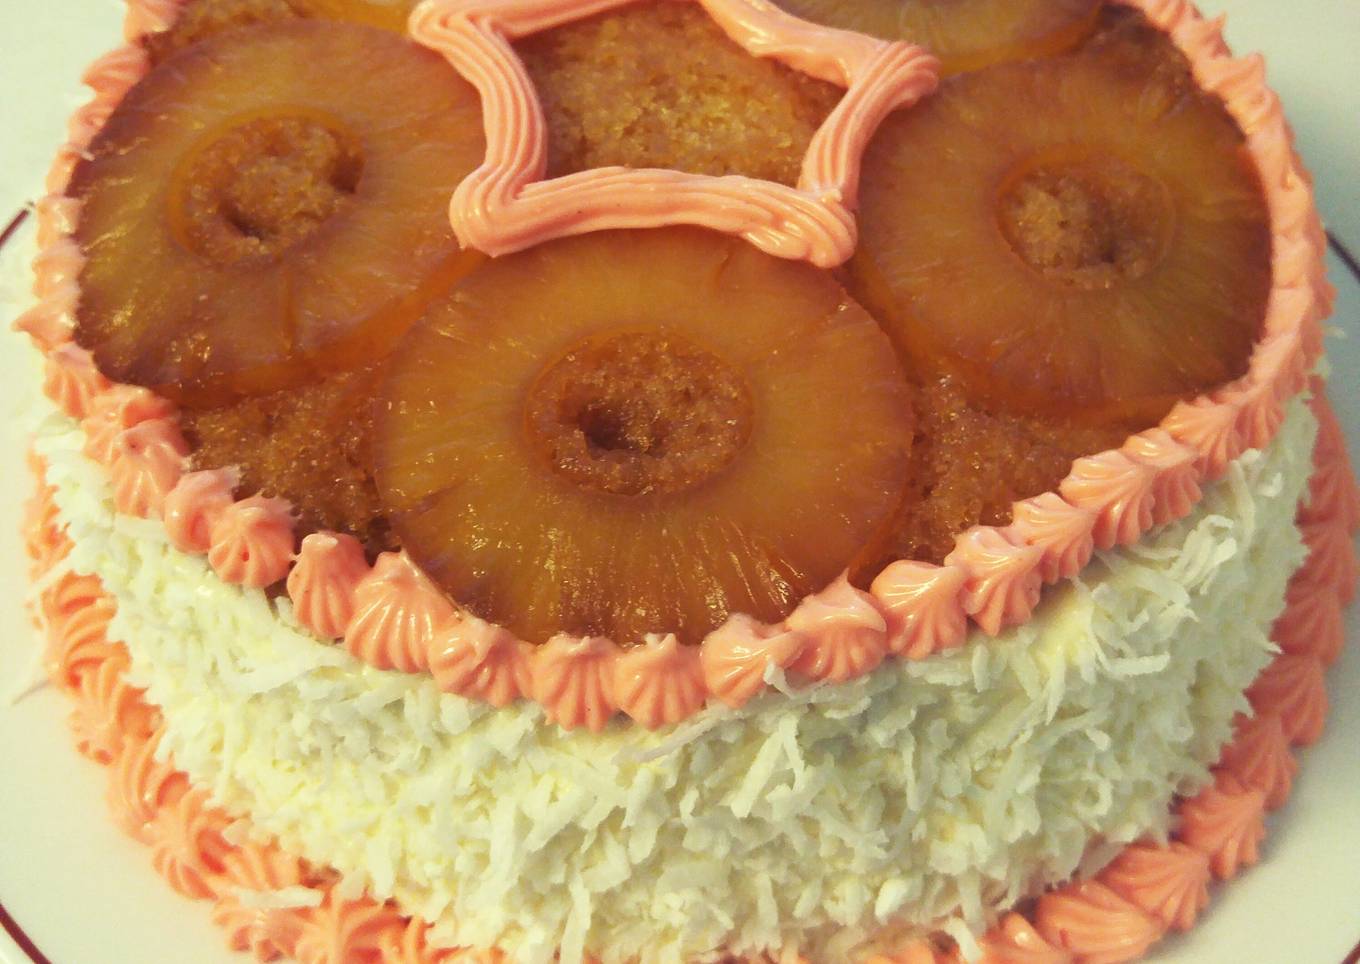 Pineapple two layer upside down cake.